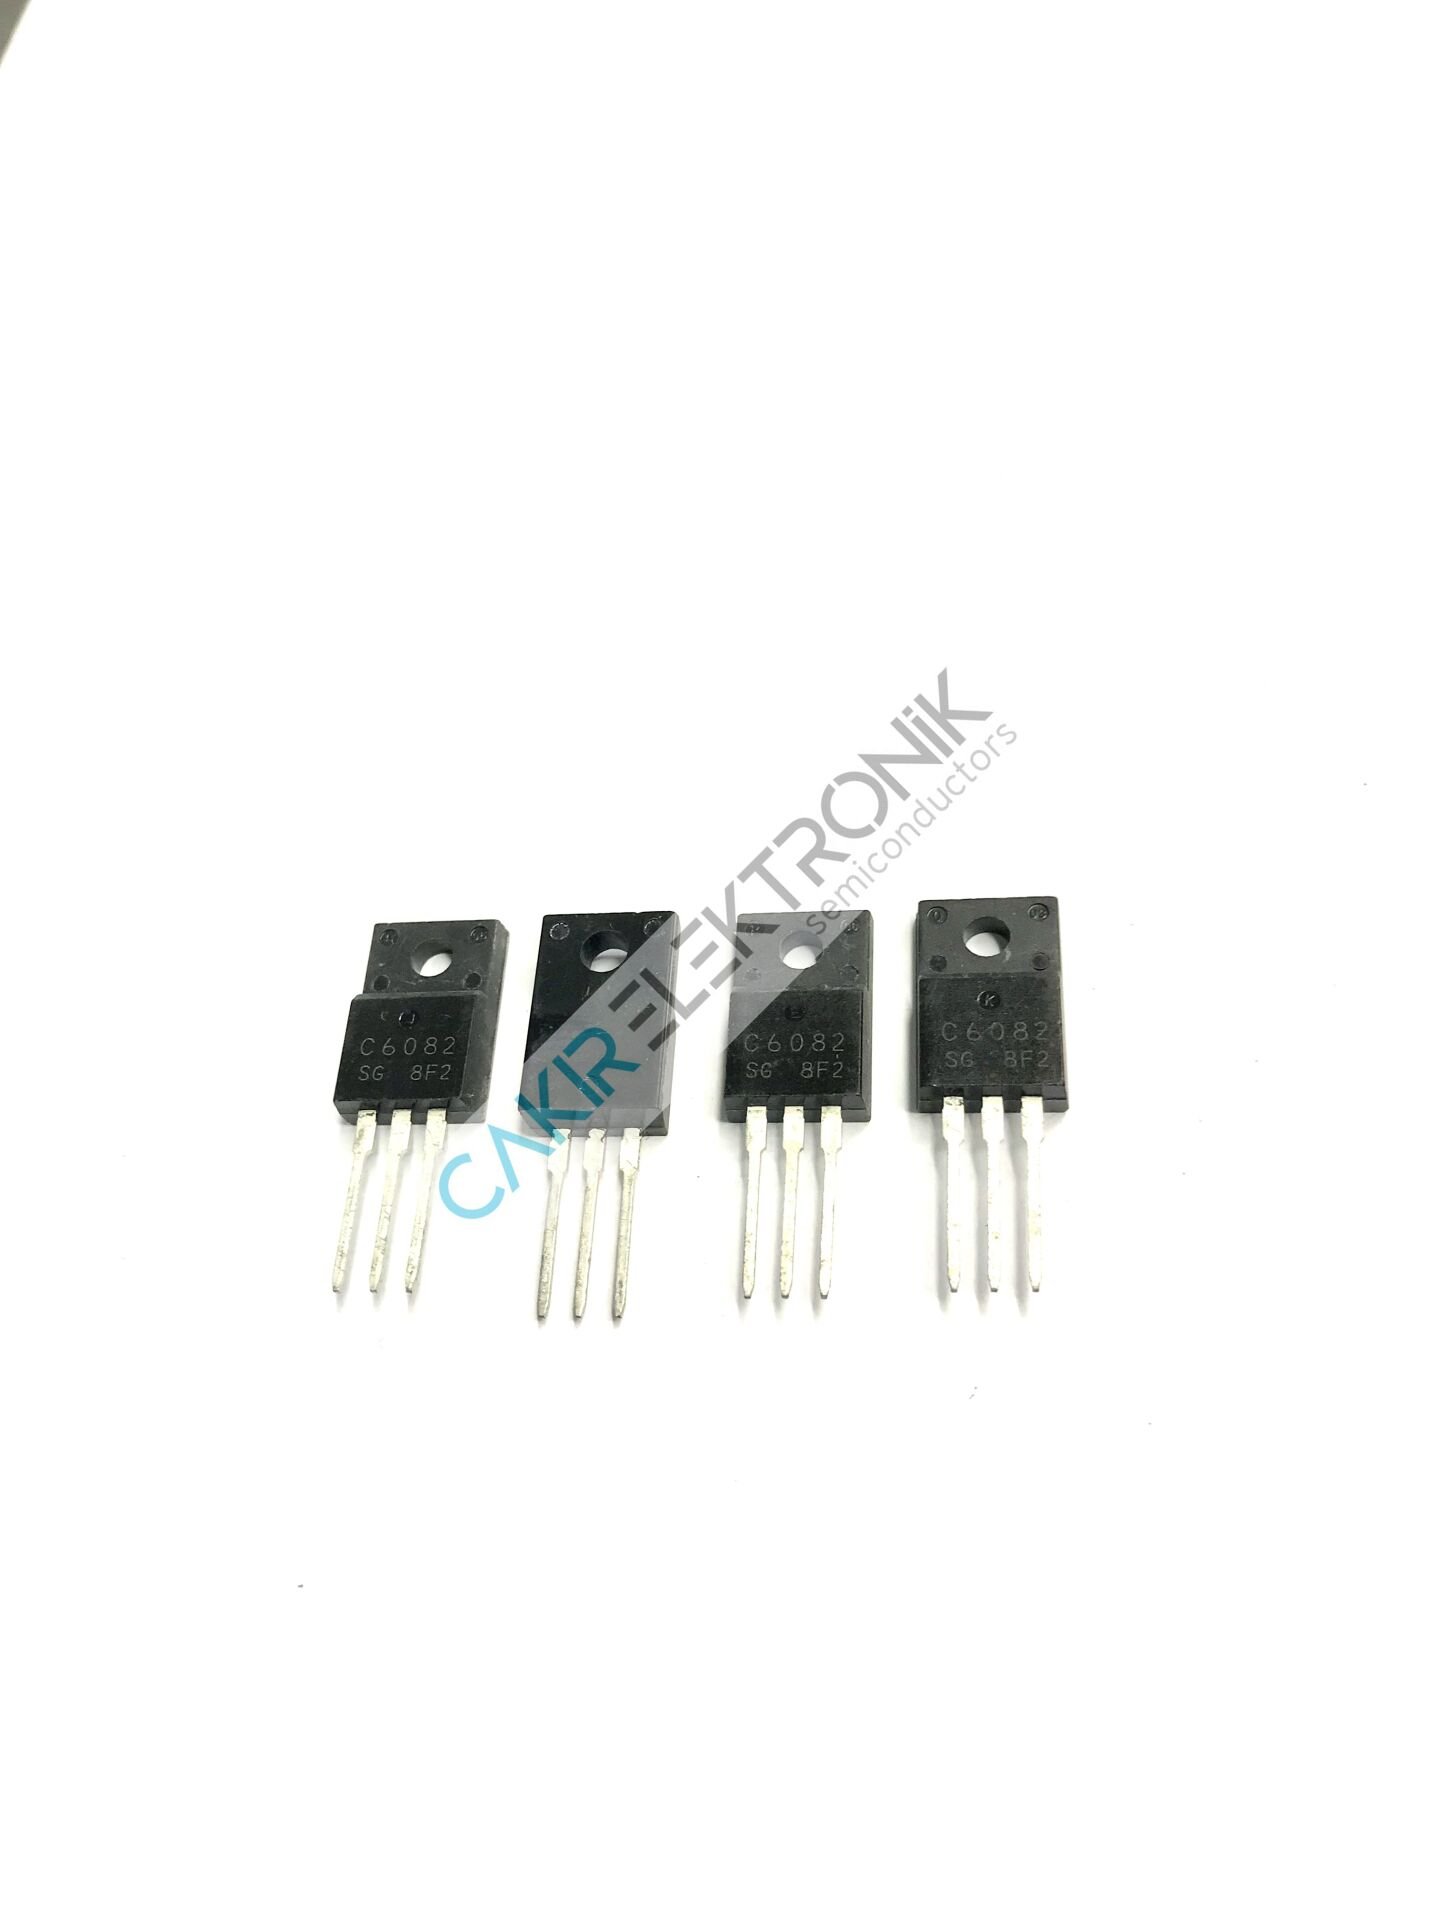 C6082 - 2SC6082 50V / 15A High-Speed Switching Ap-plications